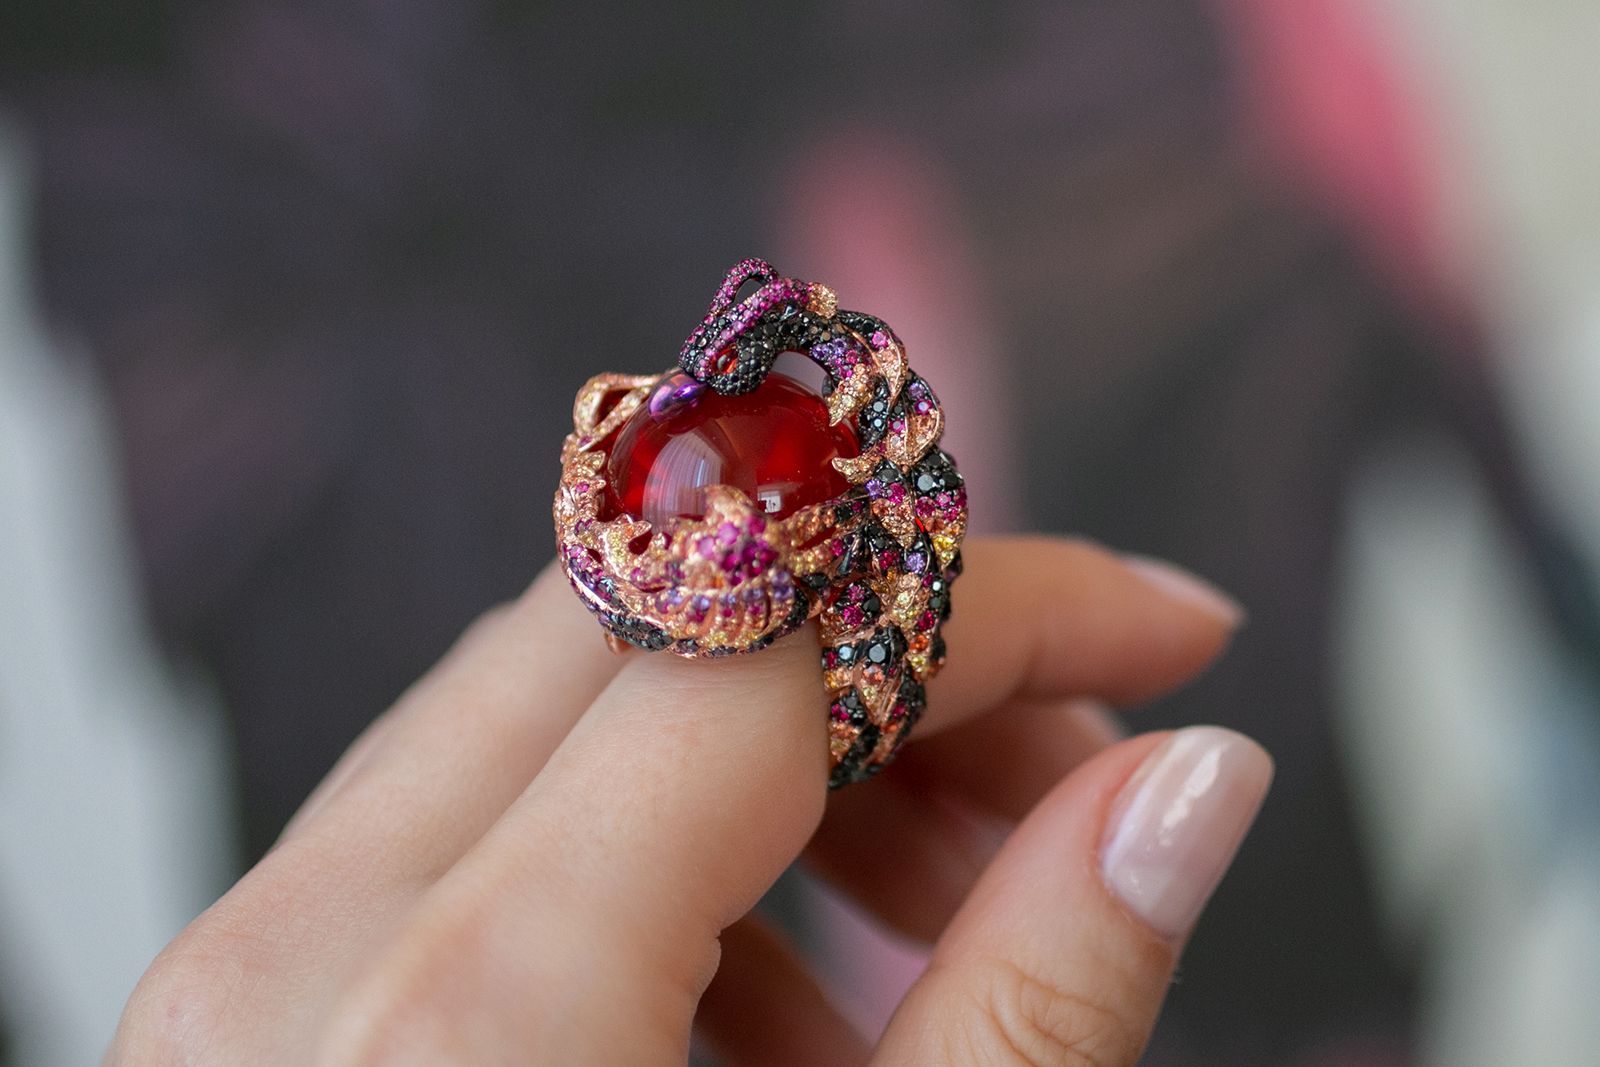 Chopard ring from The Red Carpet collection in ethical Fairmined-certified 18k rose gold and titanium with an opal cabochon of 43.46 carats and set with yellow sapphires, orange sapphires, black diamonds, rubies and amethysts 